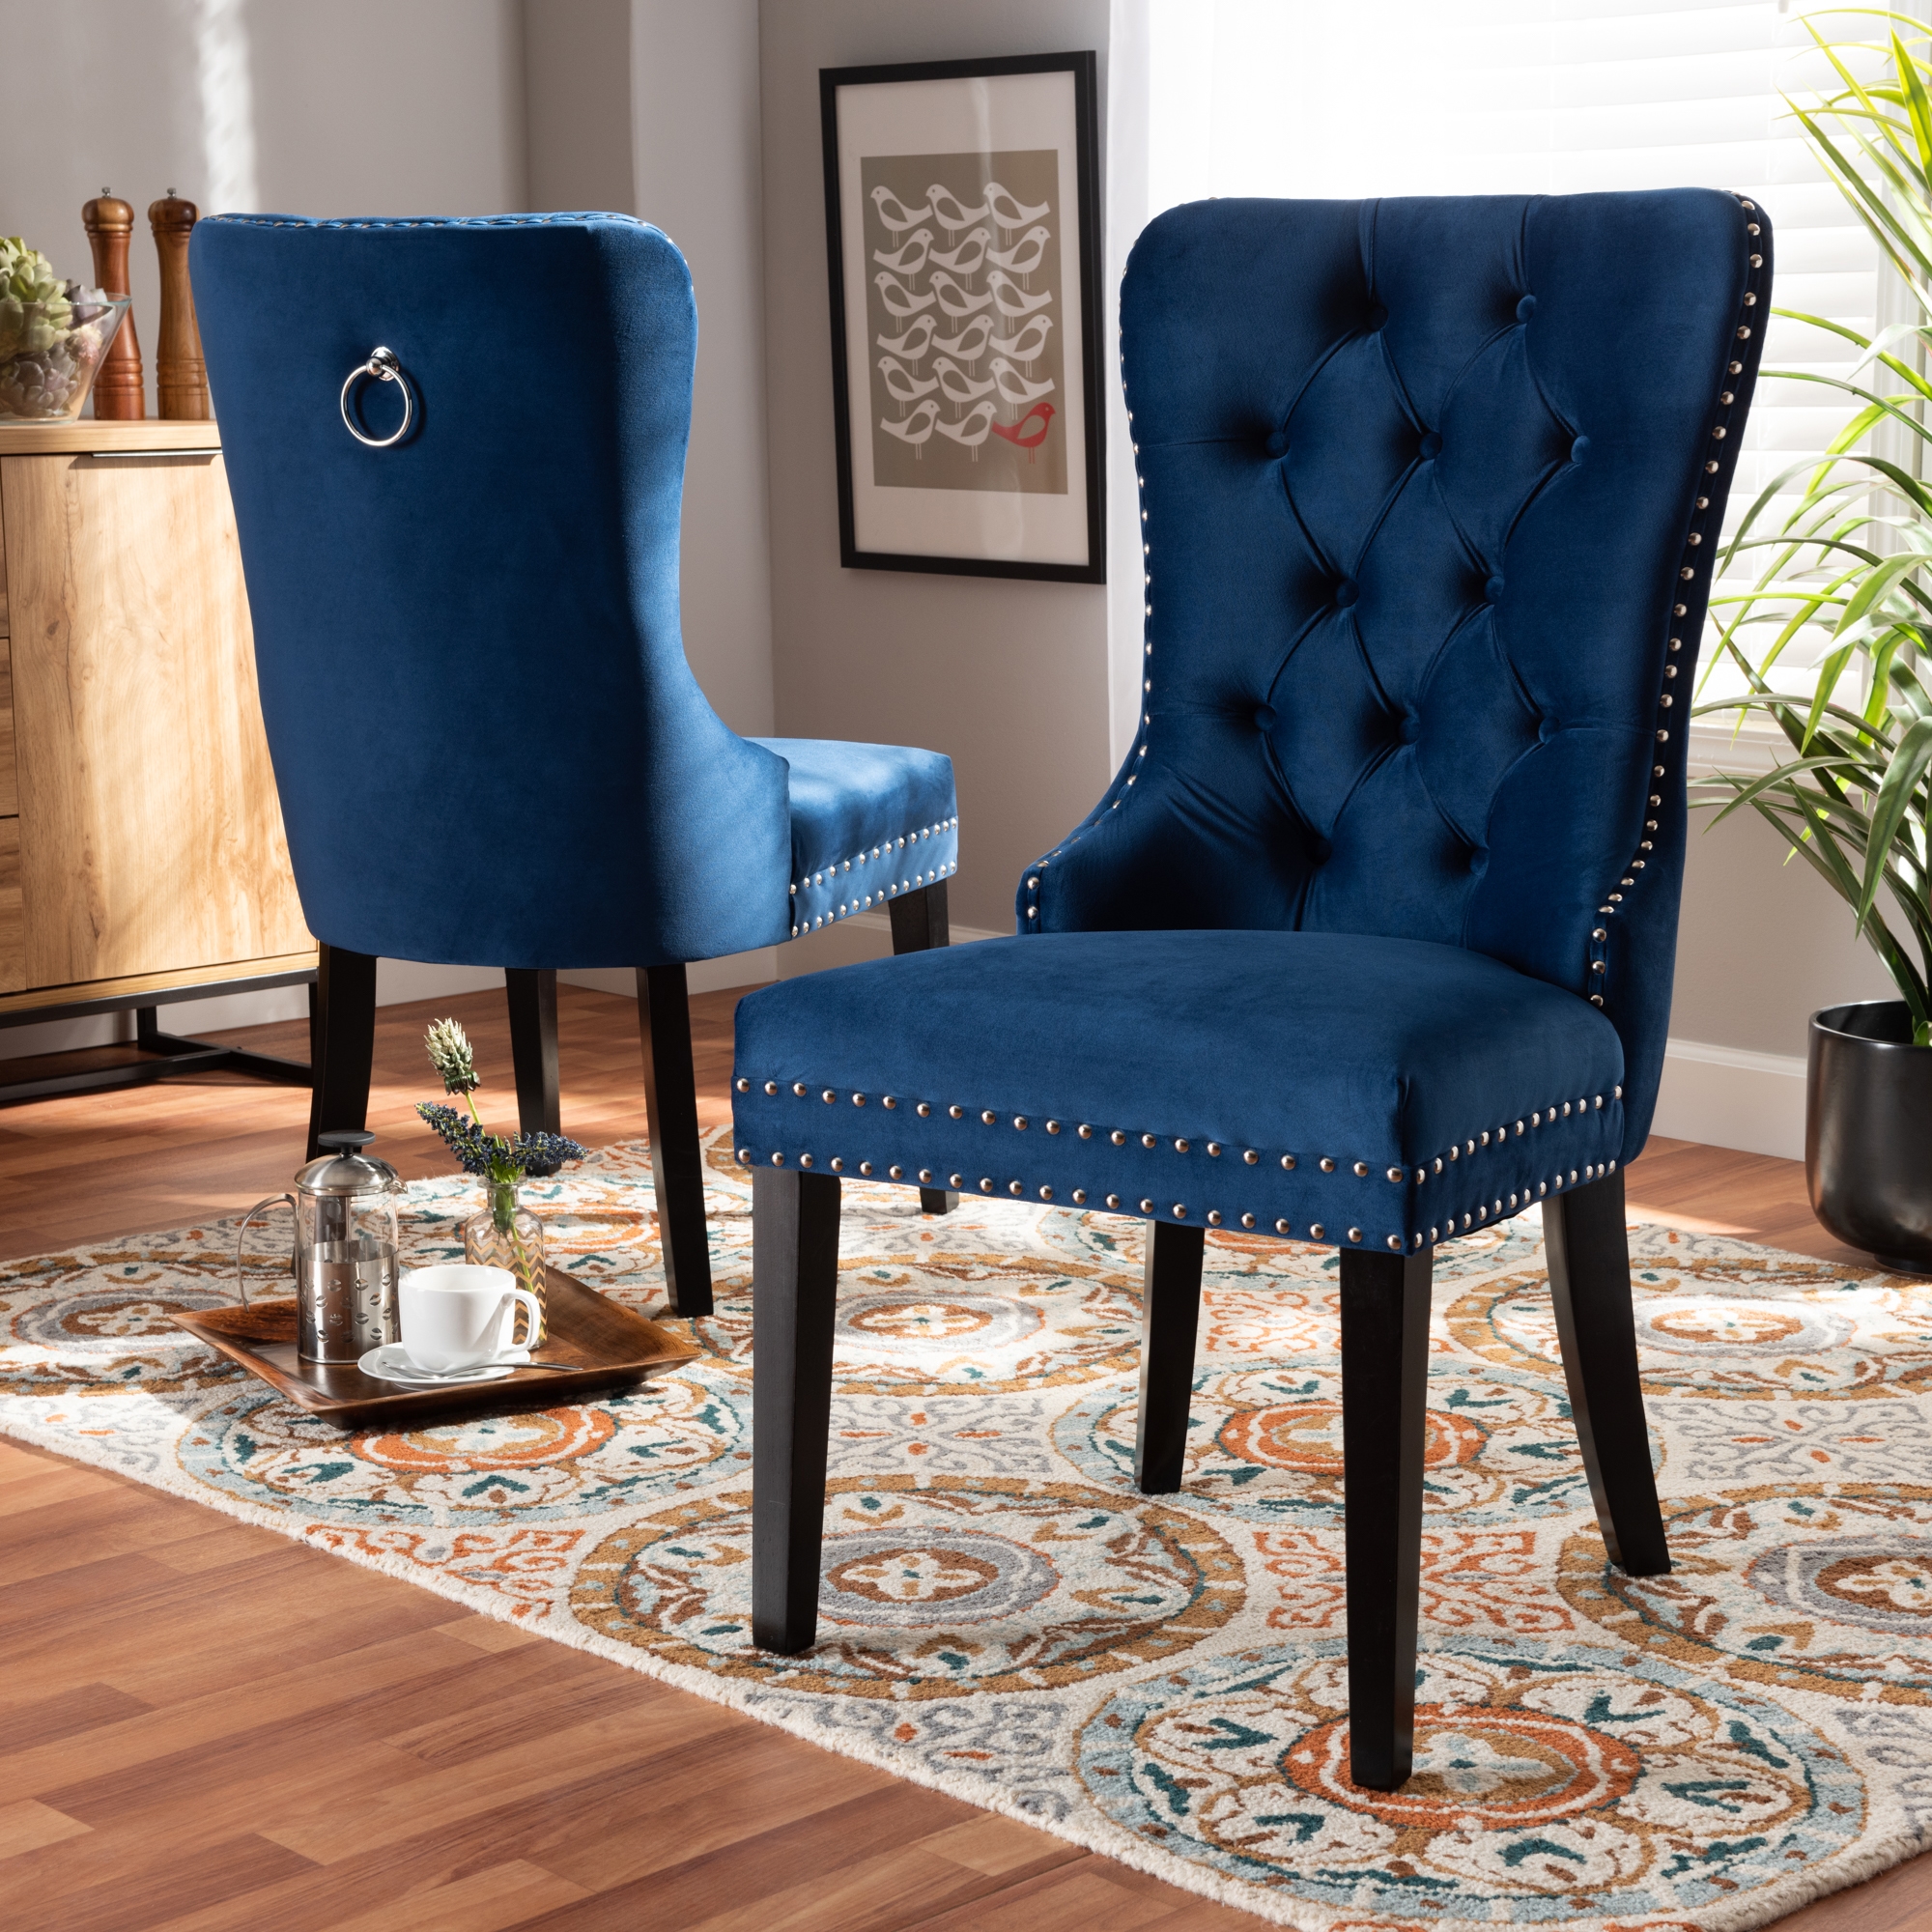 Velvet Cloth Chair Coffee Chair Solid Wood Dining Chair 2 Blue 26.4x18.5x38.6" 